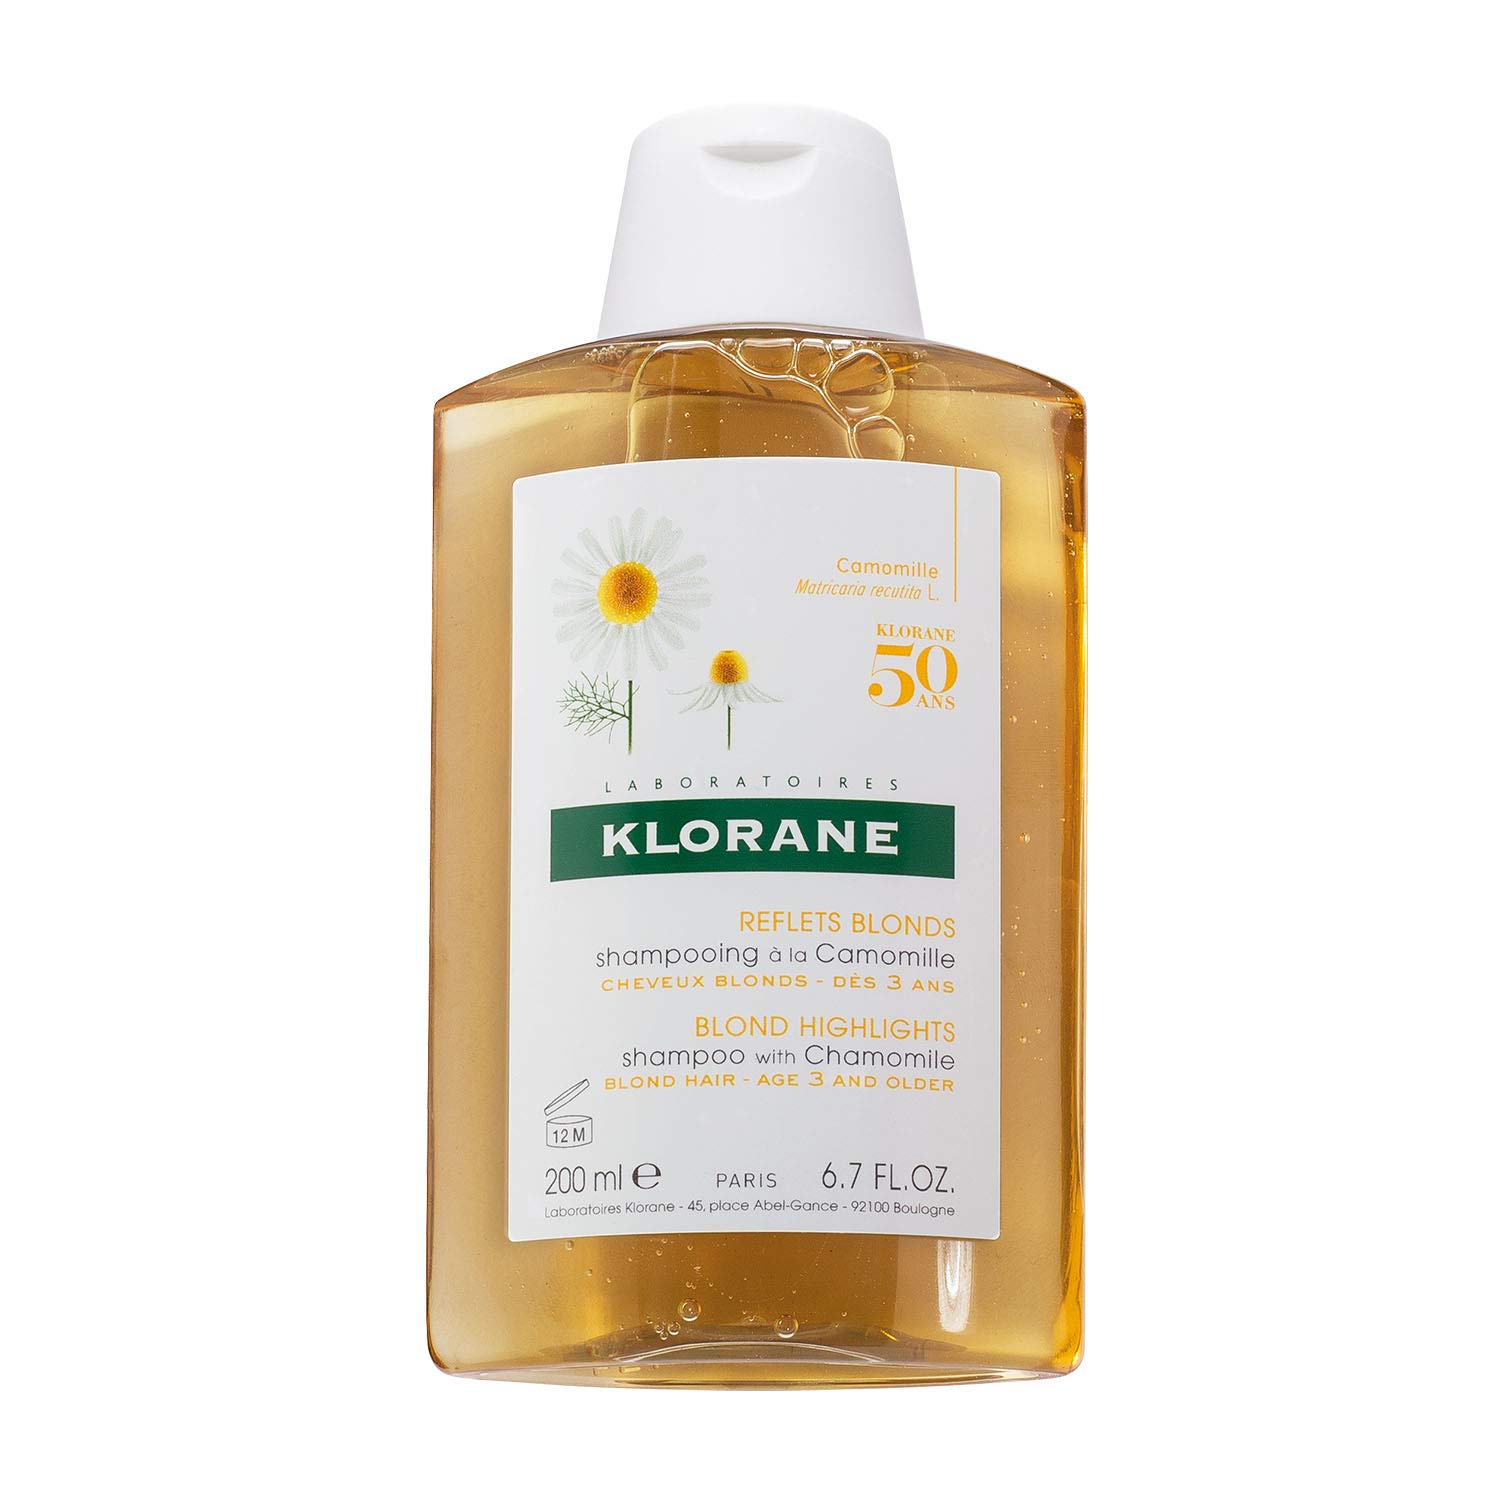 Klorane Camomile Shampoo for Women 200ml Cleansing for Shiny Hair